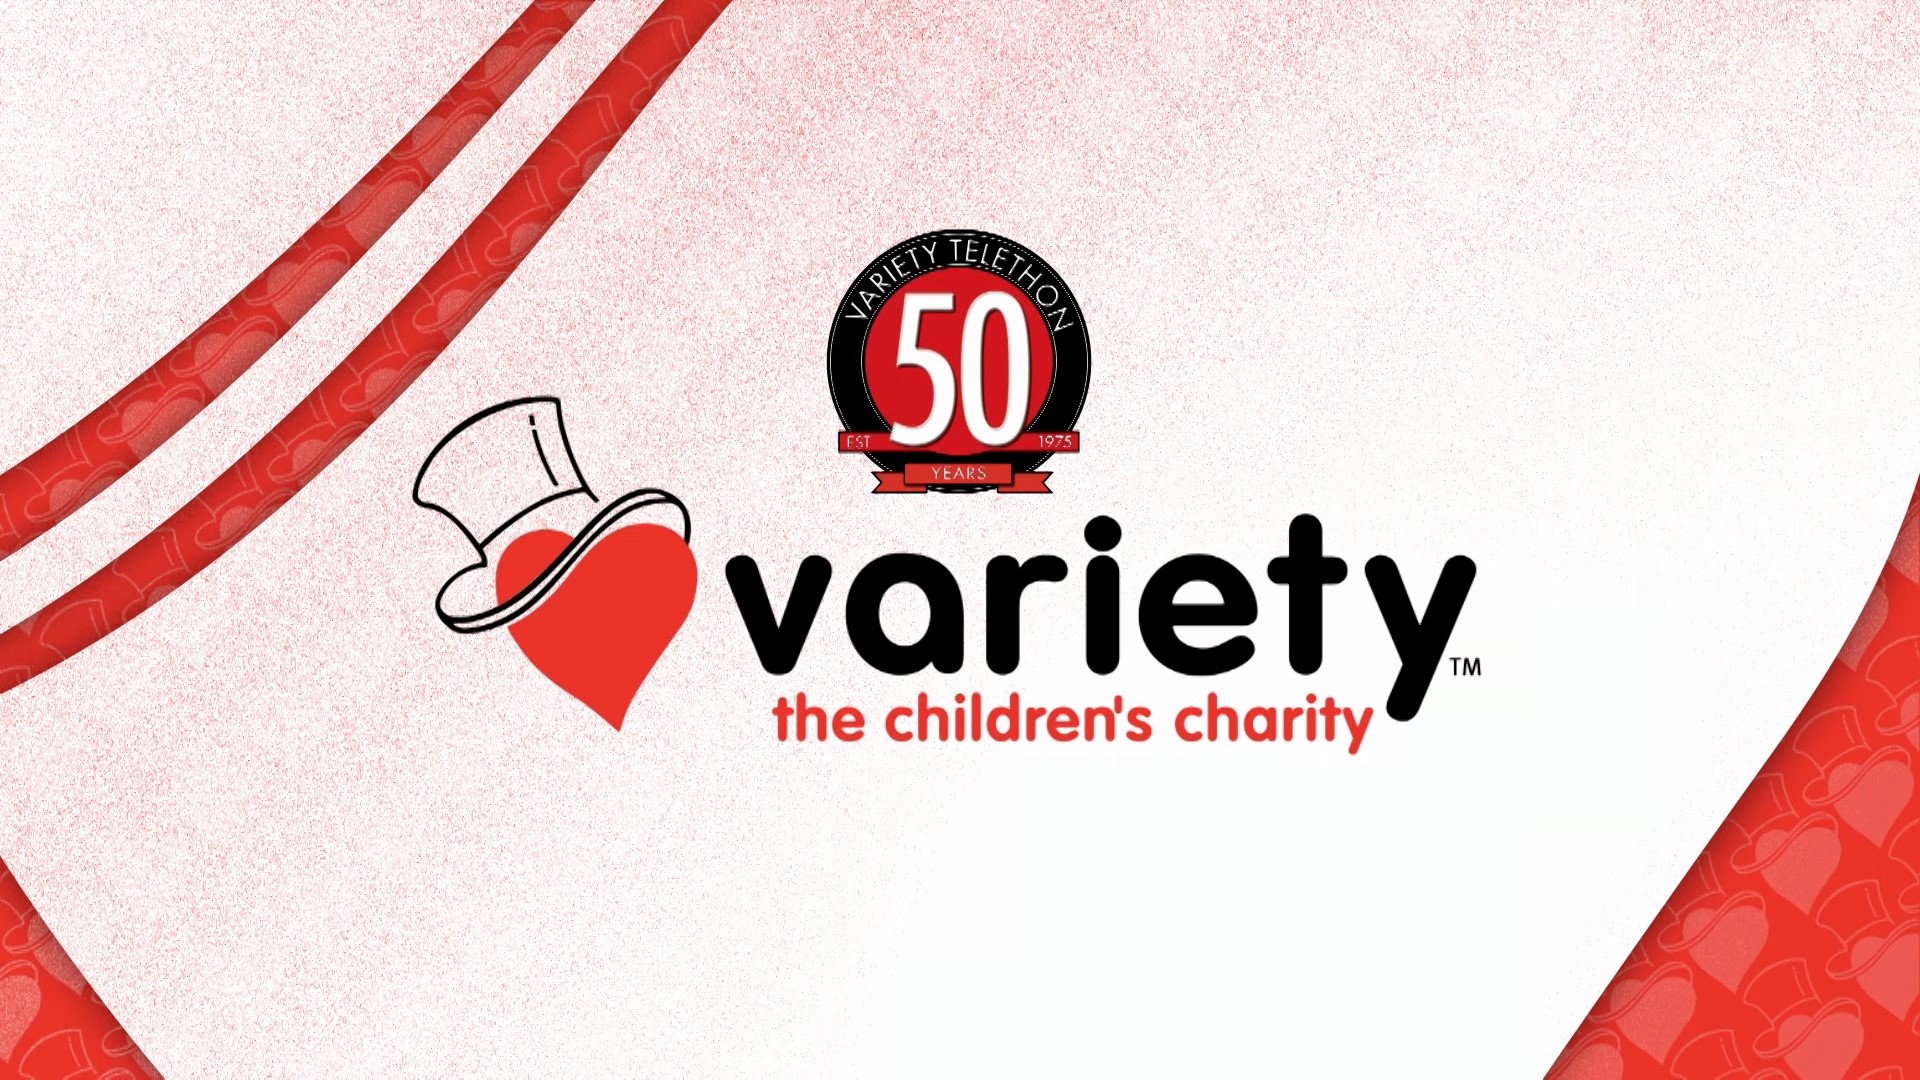 Celebrating 50 Years of Miracles for Iowa's children with Variety - the Children's Charity